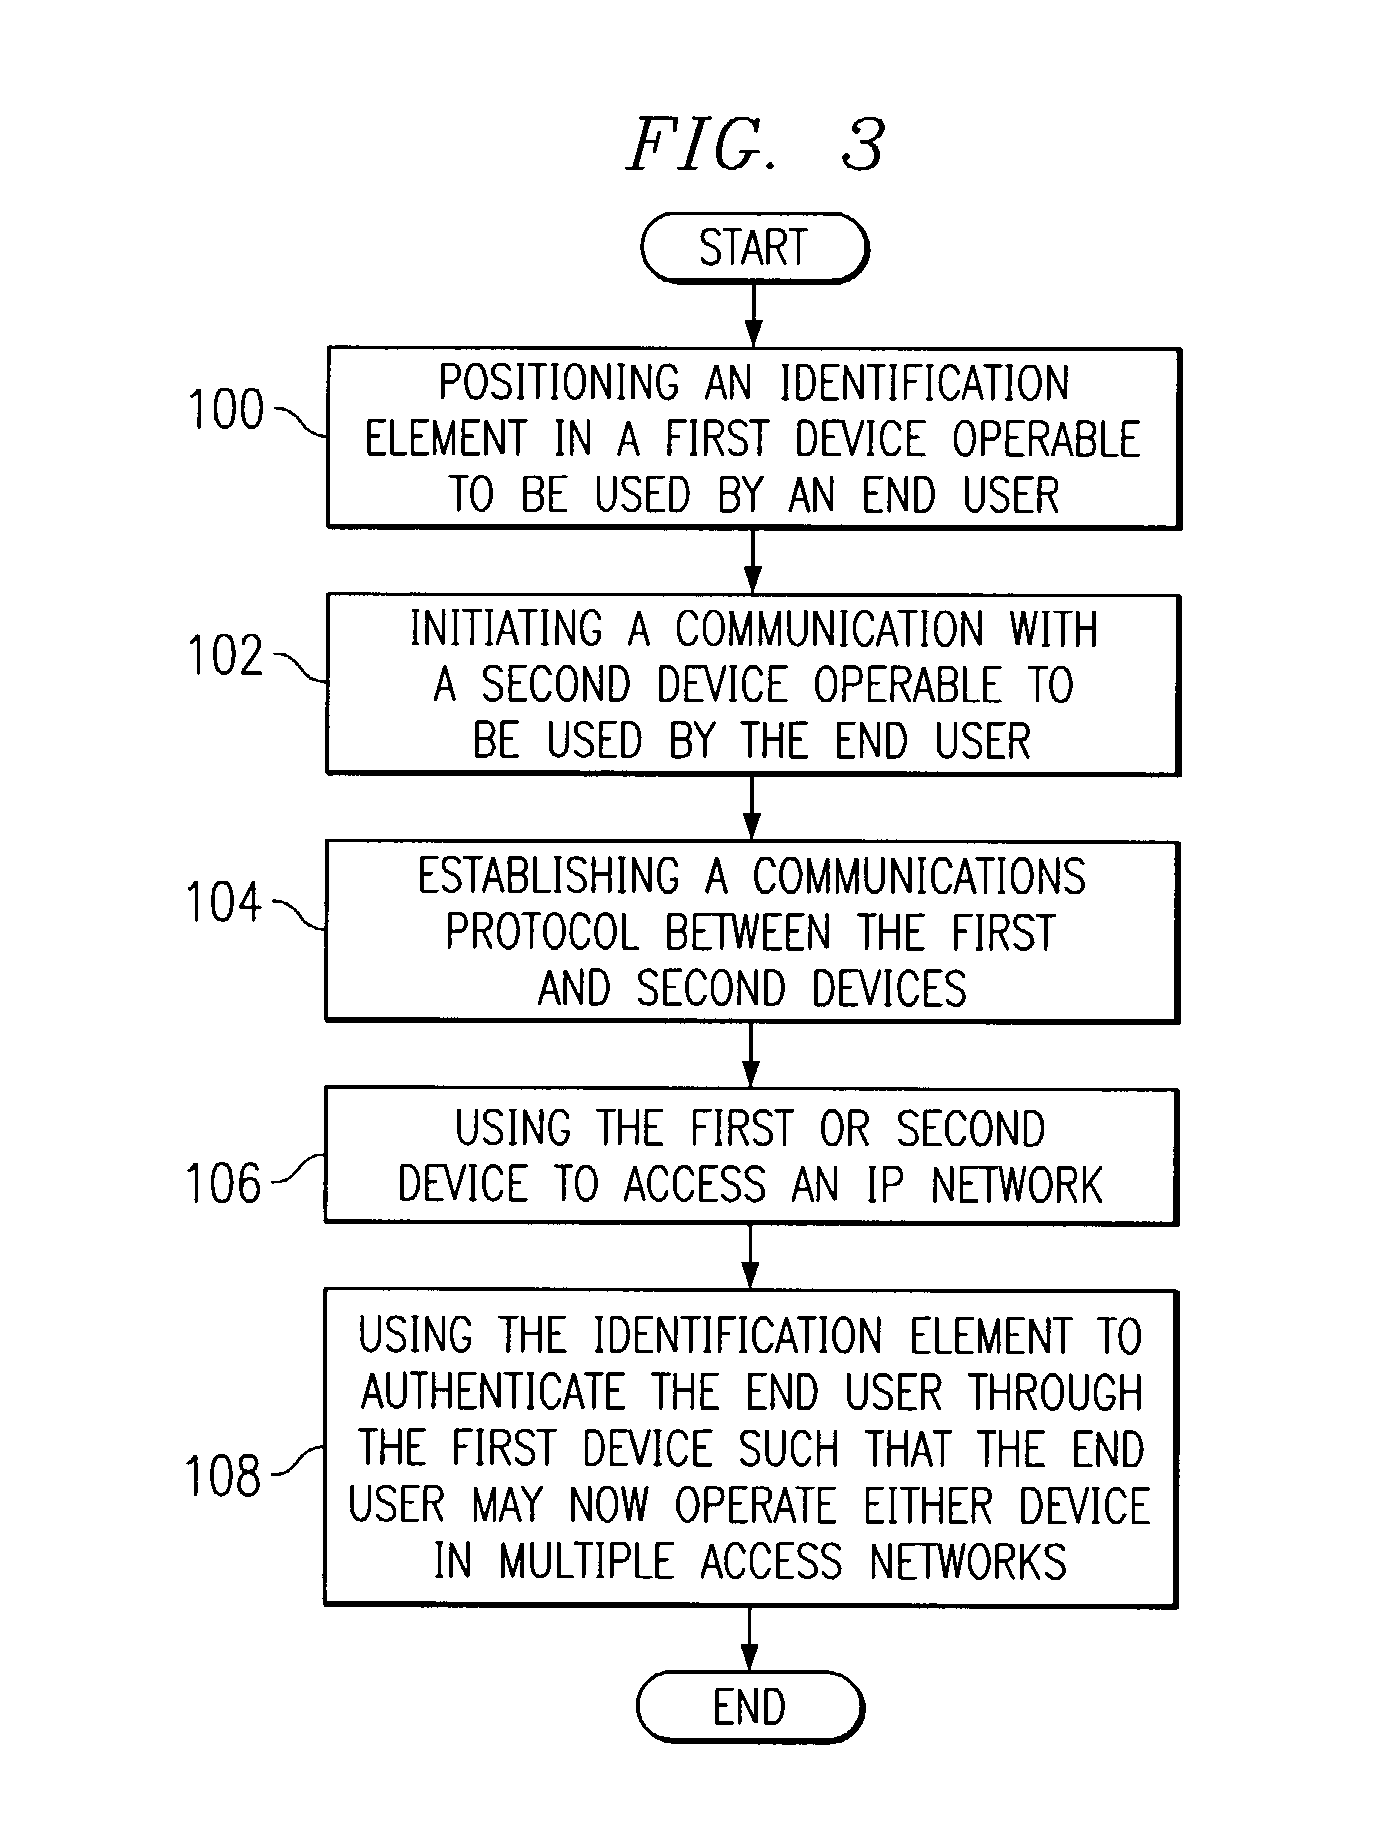 System and method for providing access to a network in a communications environment